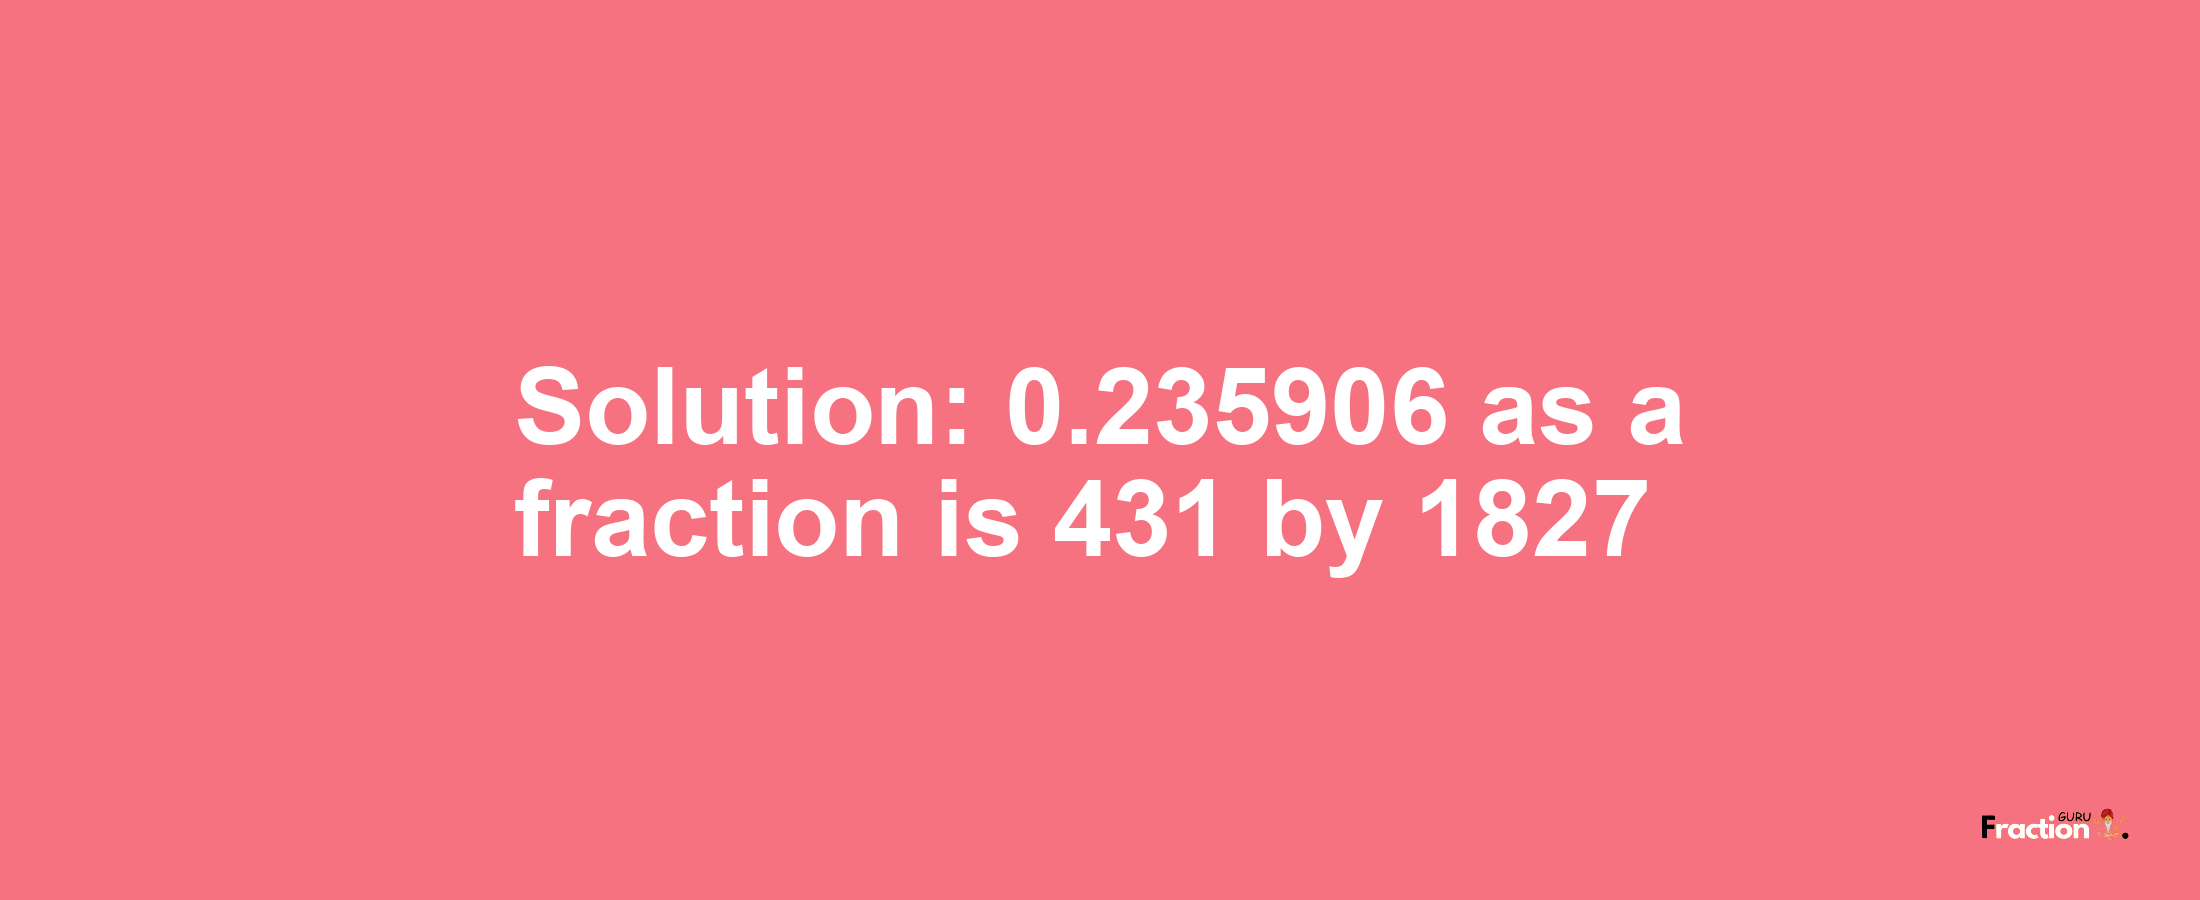 Solution:0.235906 as a fraction is 431/1827